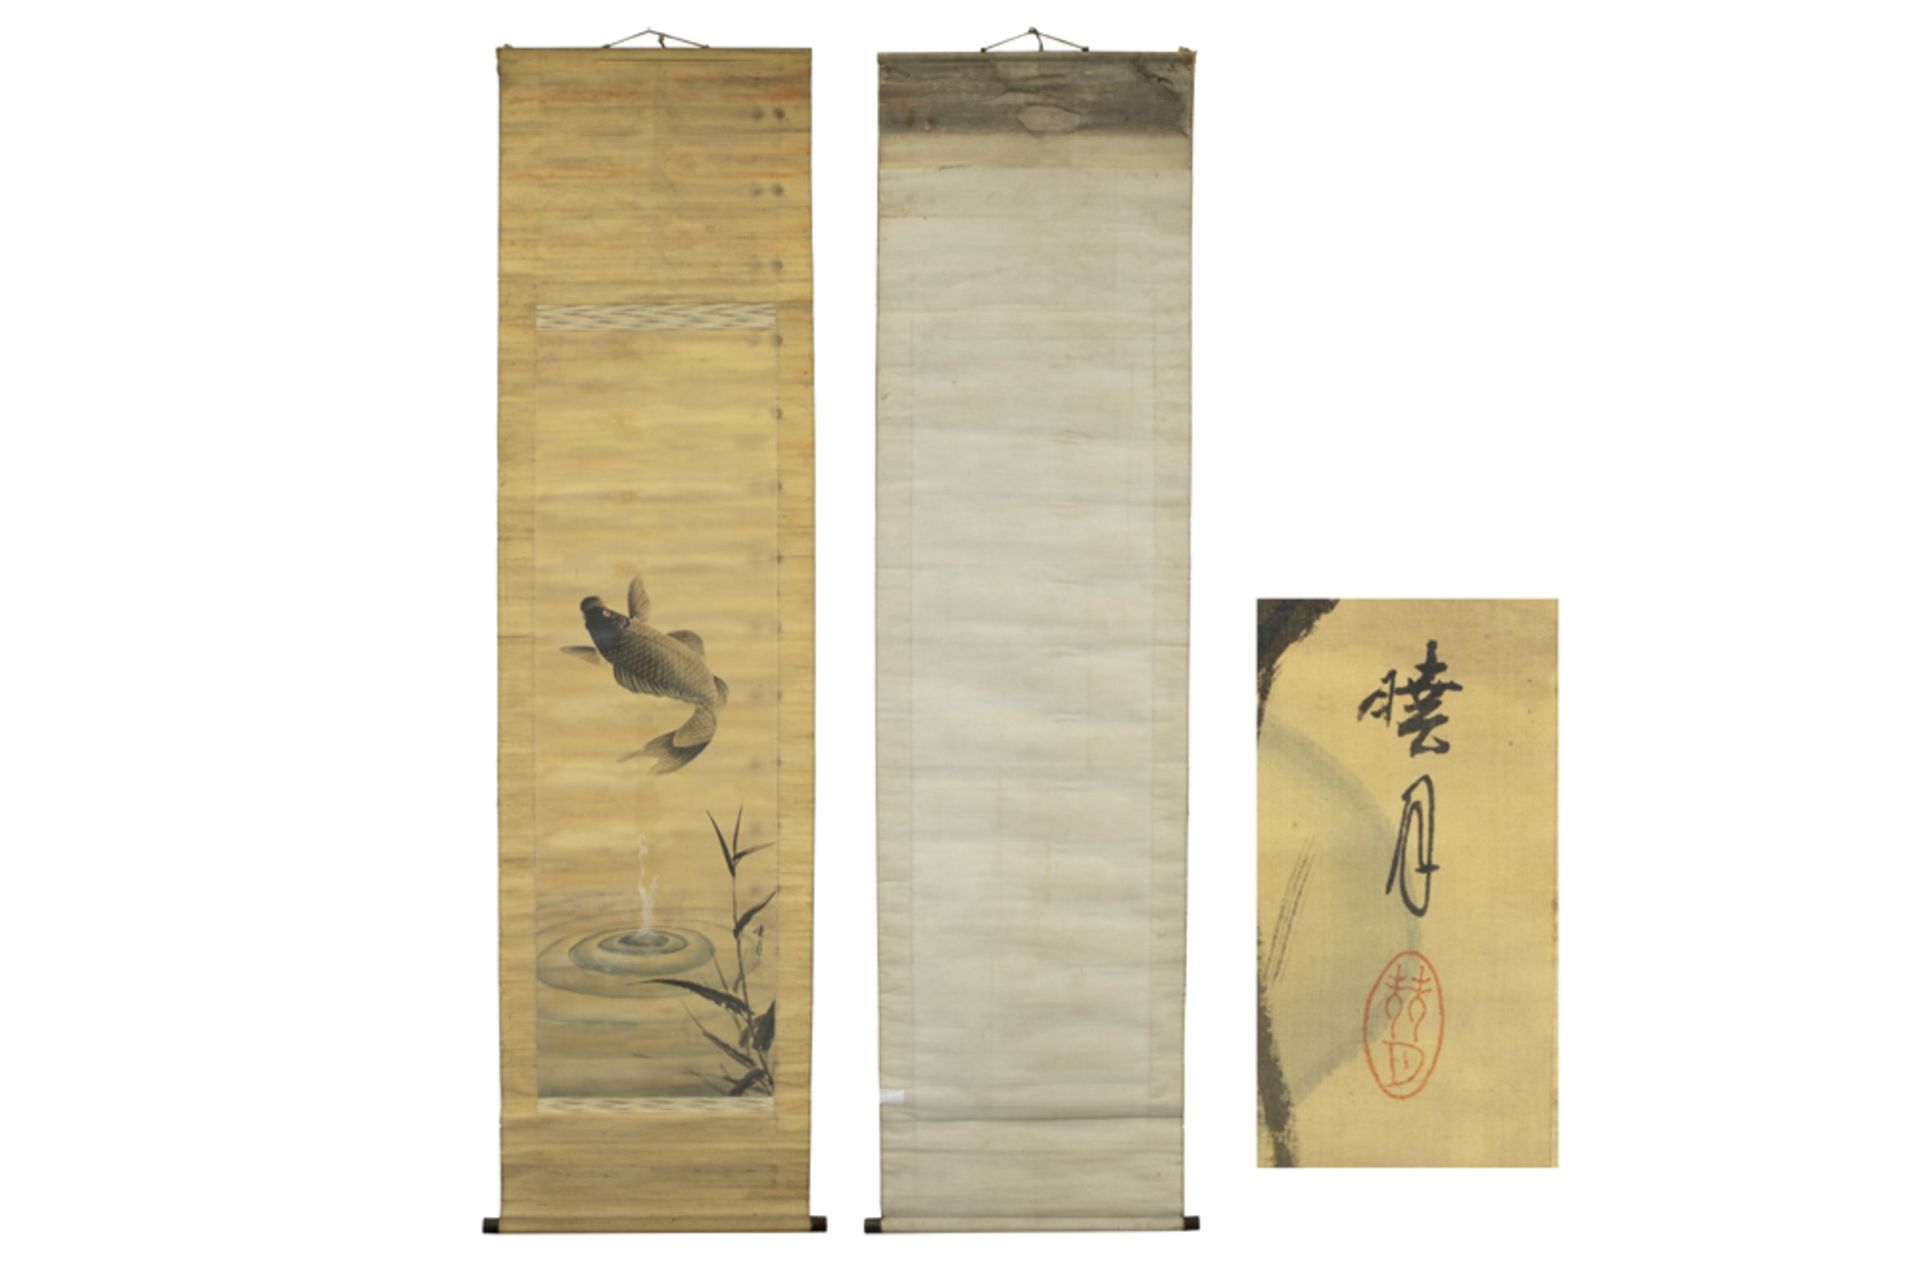 antique Chinese scroll with a "koi fish" painting || Antieke Chinese scroll met schildering met